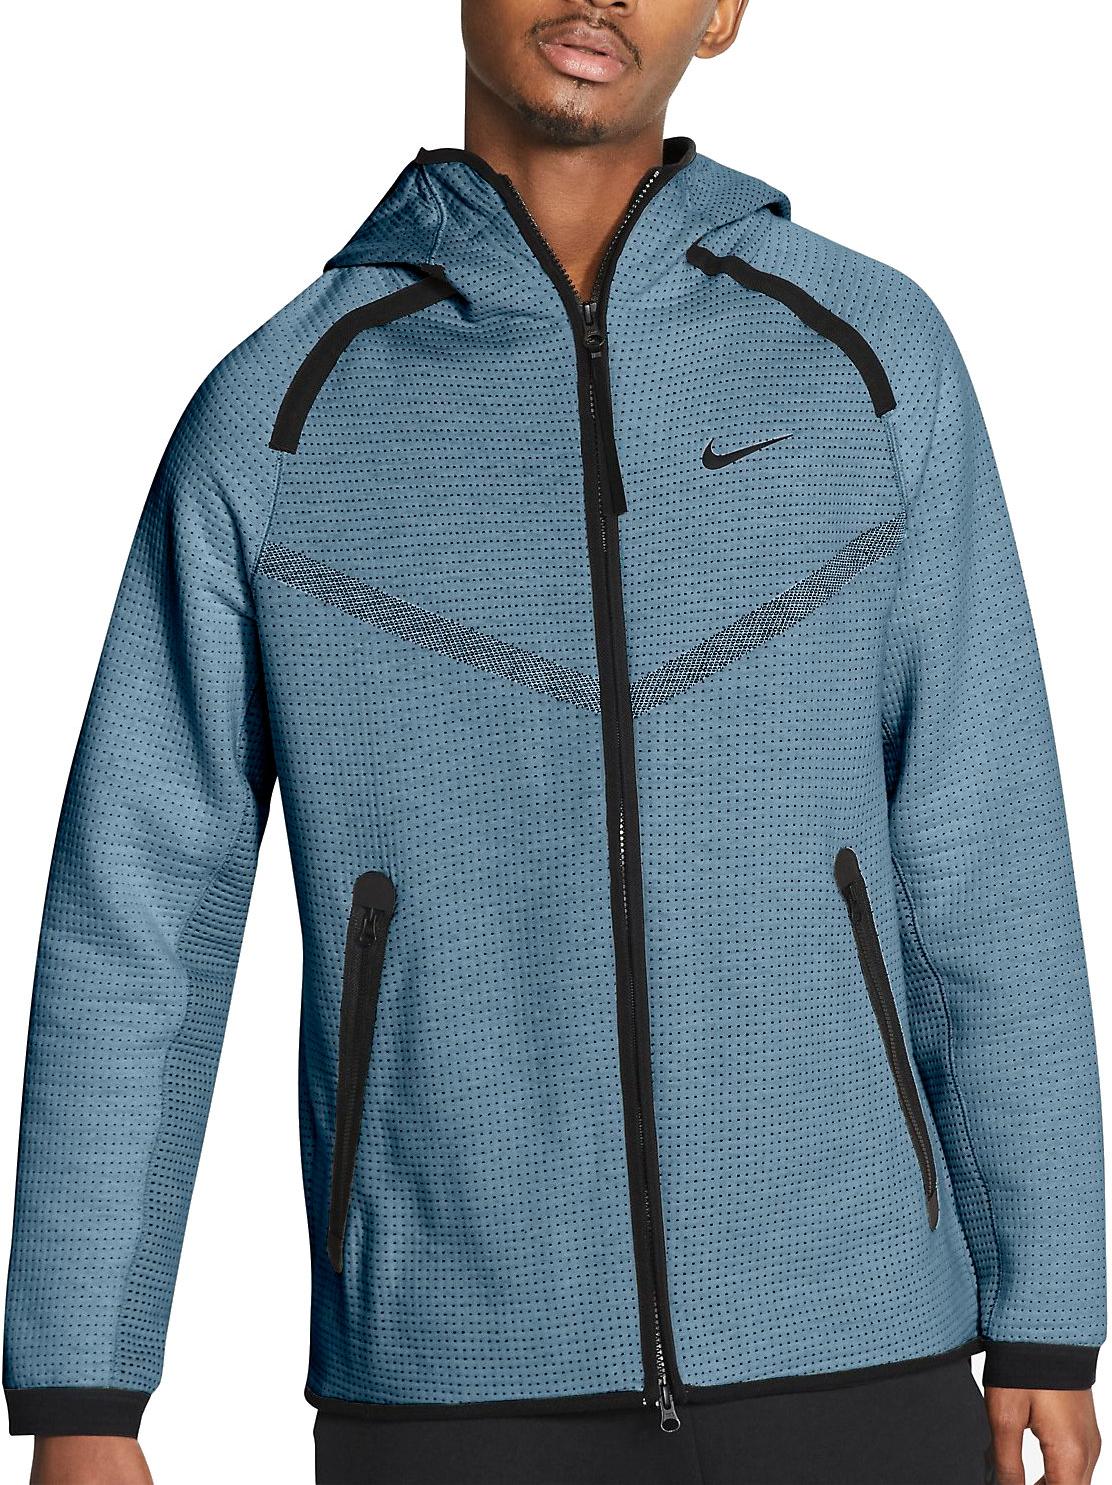 Mikica s kapuco Nike M NSW TECH PACK WR HOODIE FZ